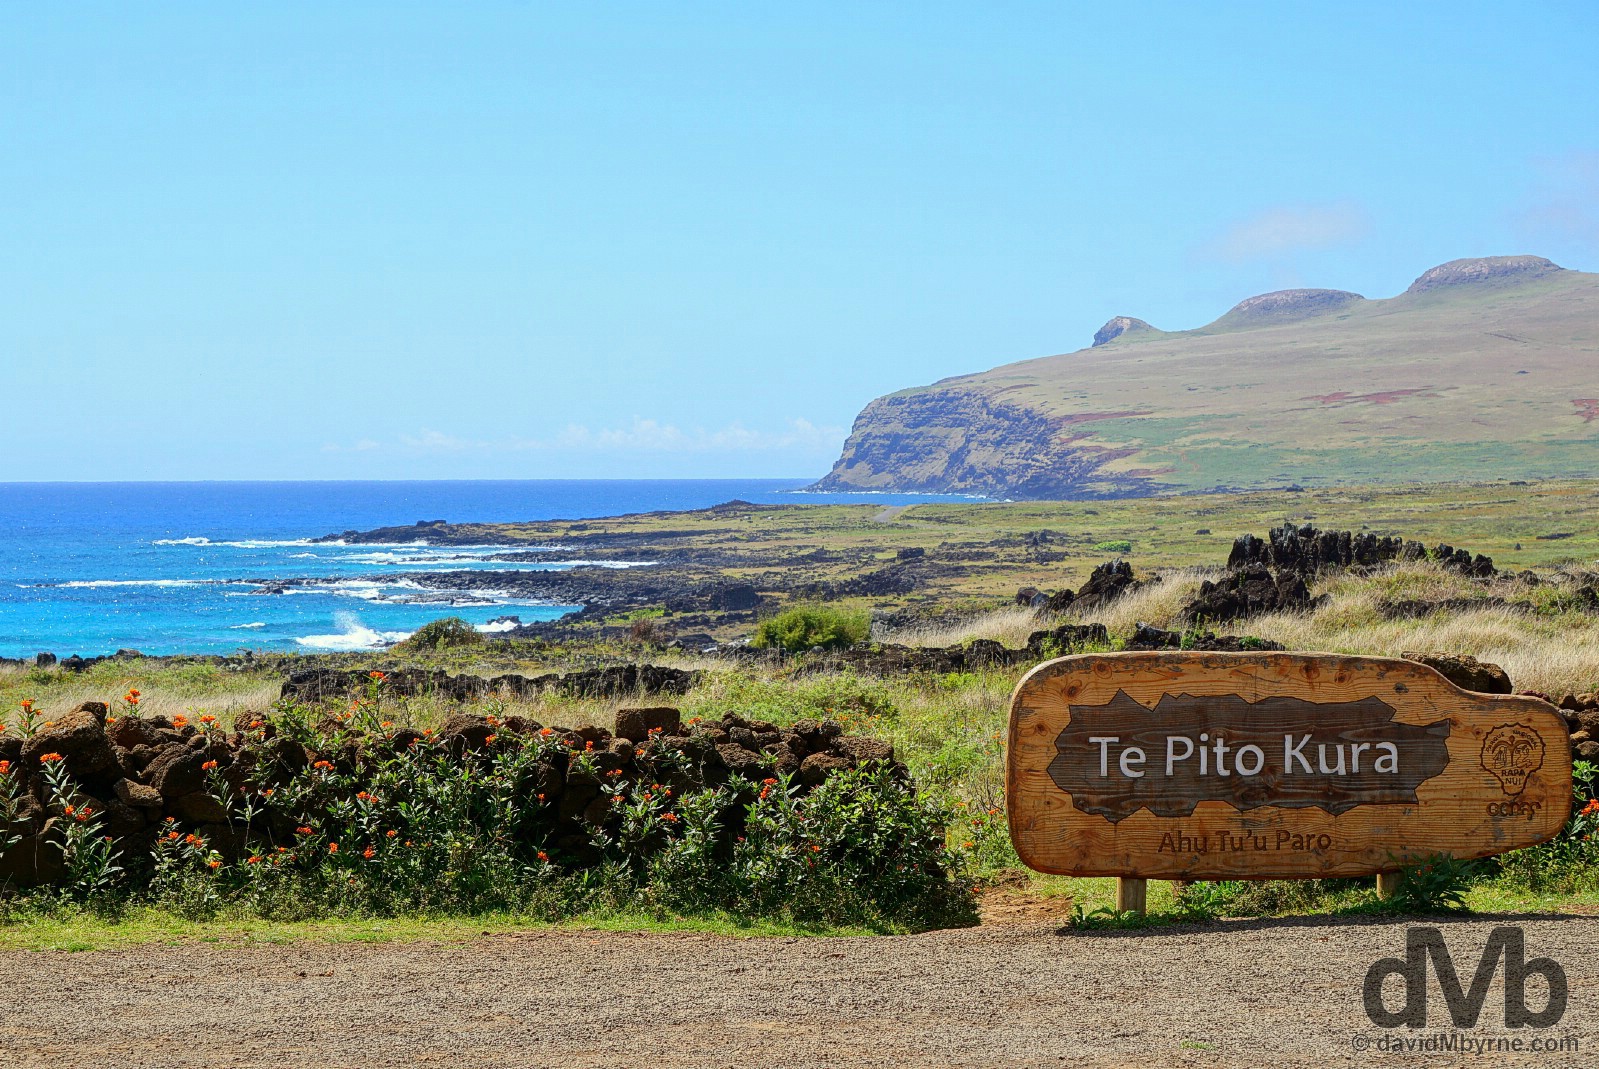 The entrance to Te Pito Kura, Easter Island, Chile. October 1, 2016.